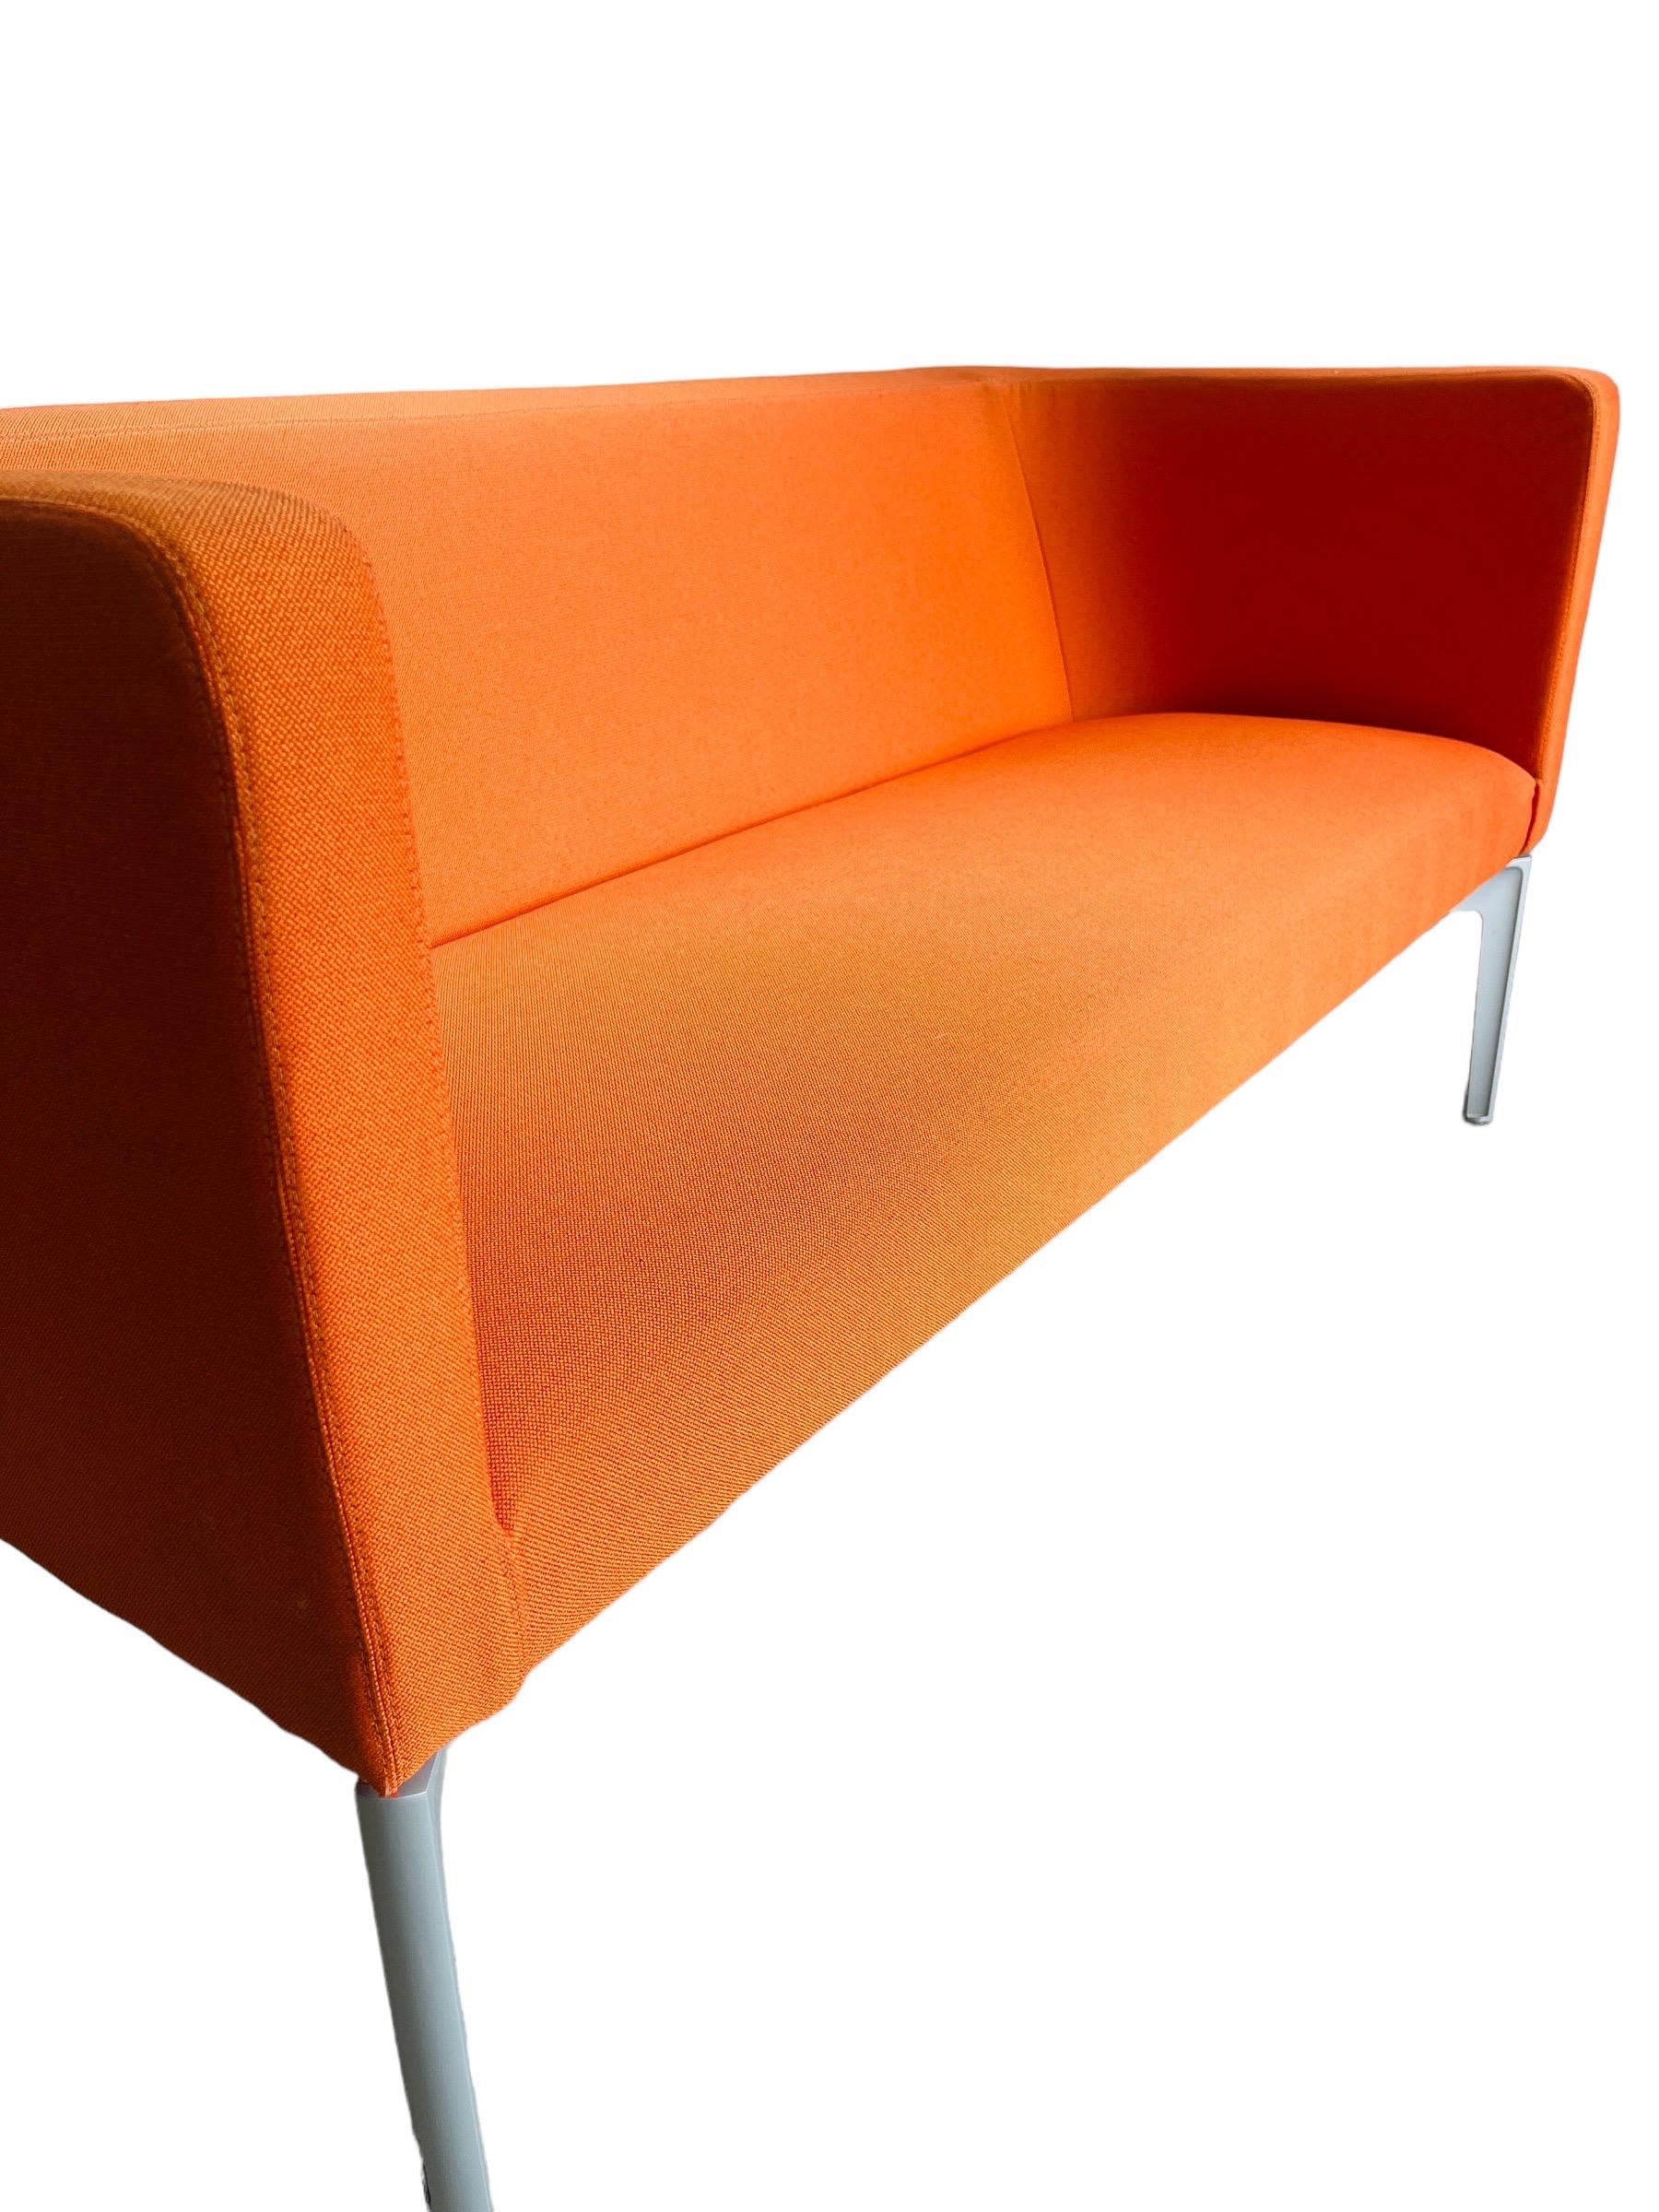 Elevate your living space with the vibrant allure of the Steelcase Bivi Rumble Seat Collection Sofa. Upholstered in a striking orange hue, this sofa is designed not only to captivate but also to offer robust functionality in a compact design.